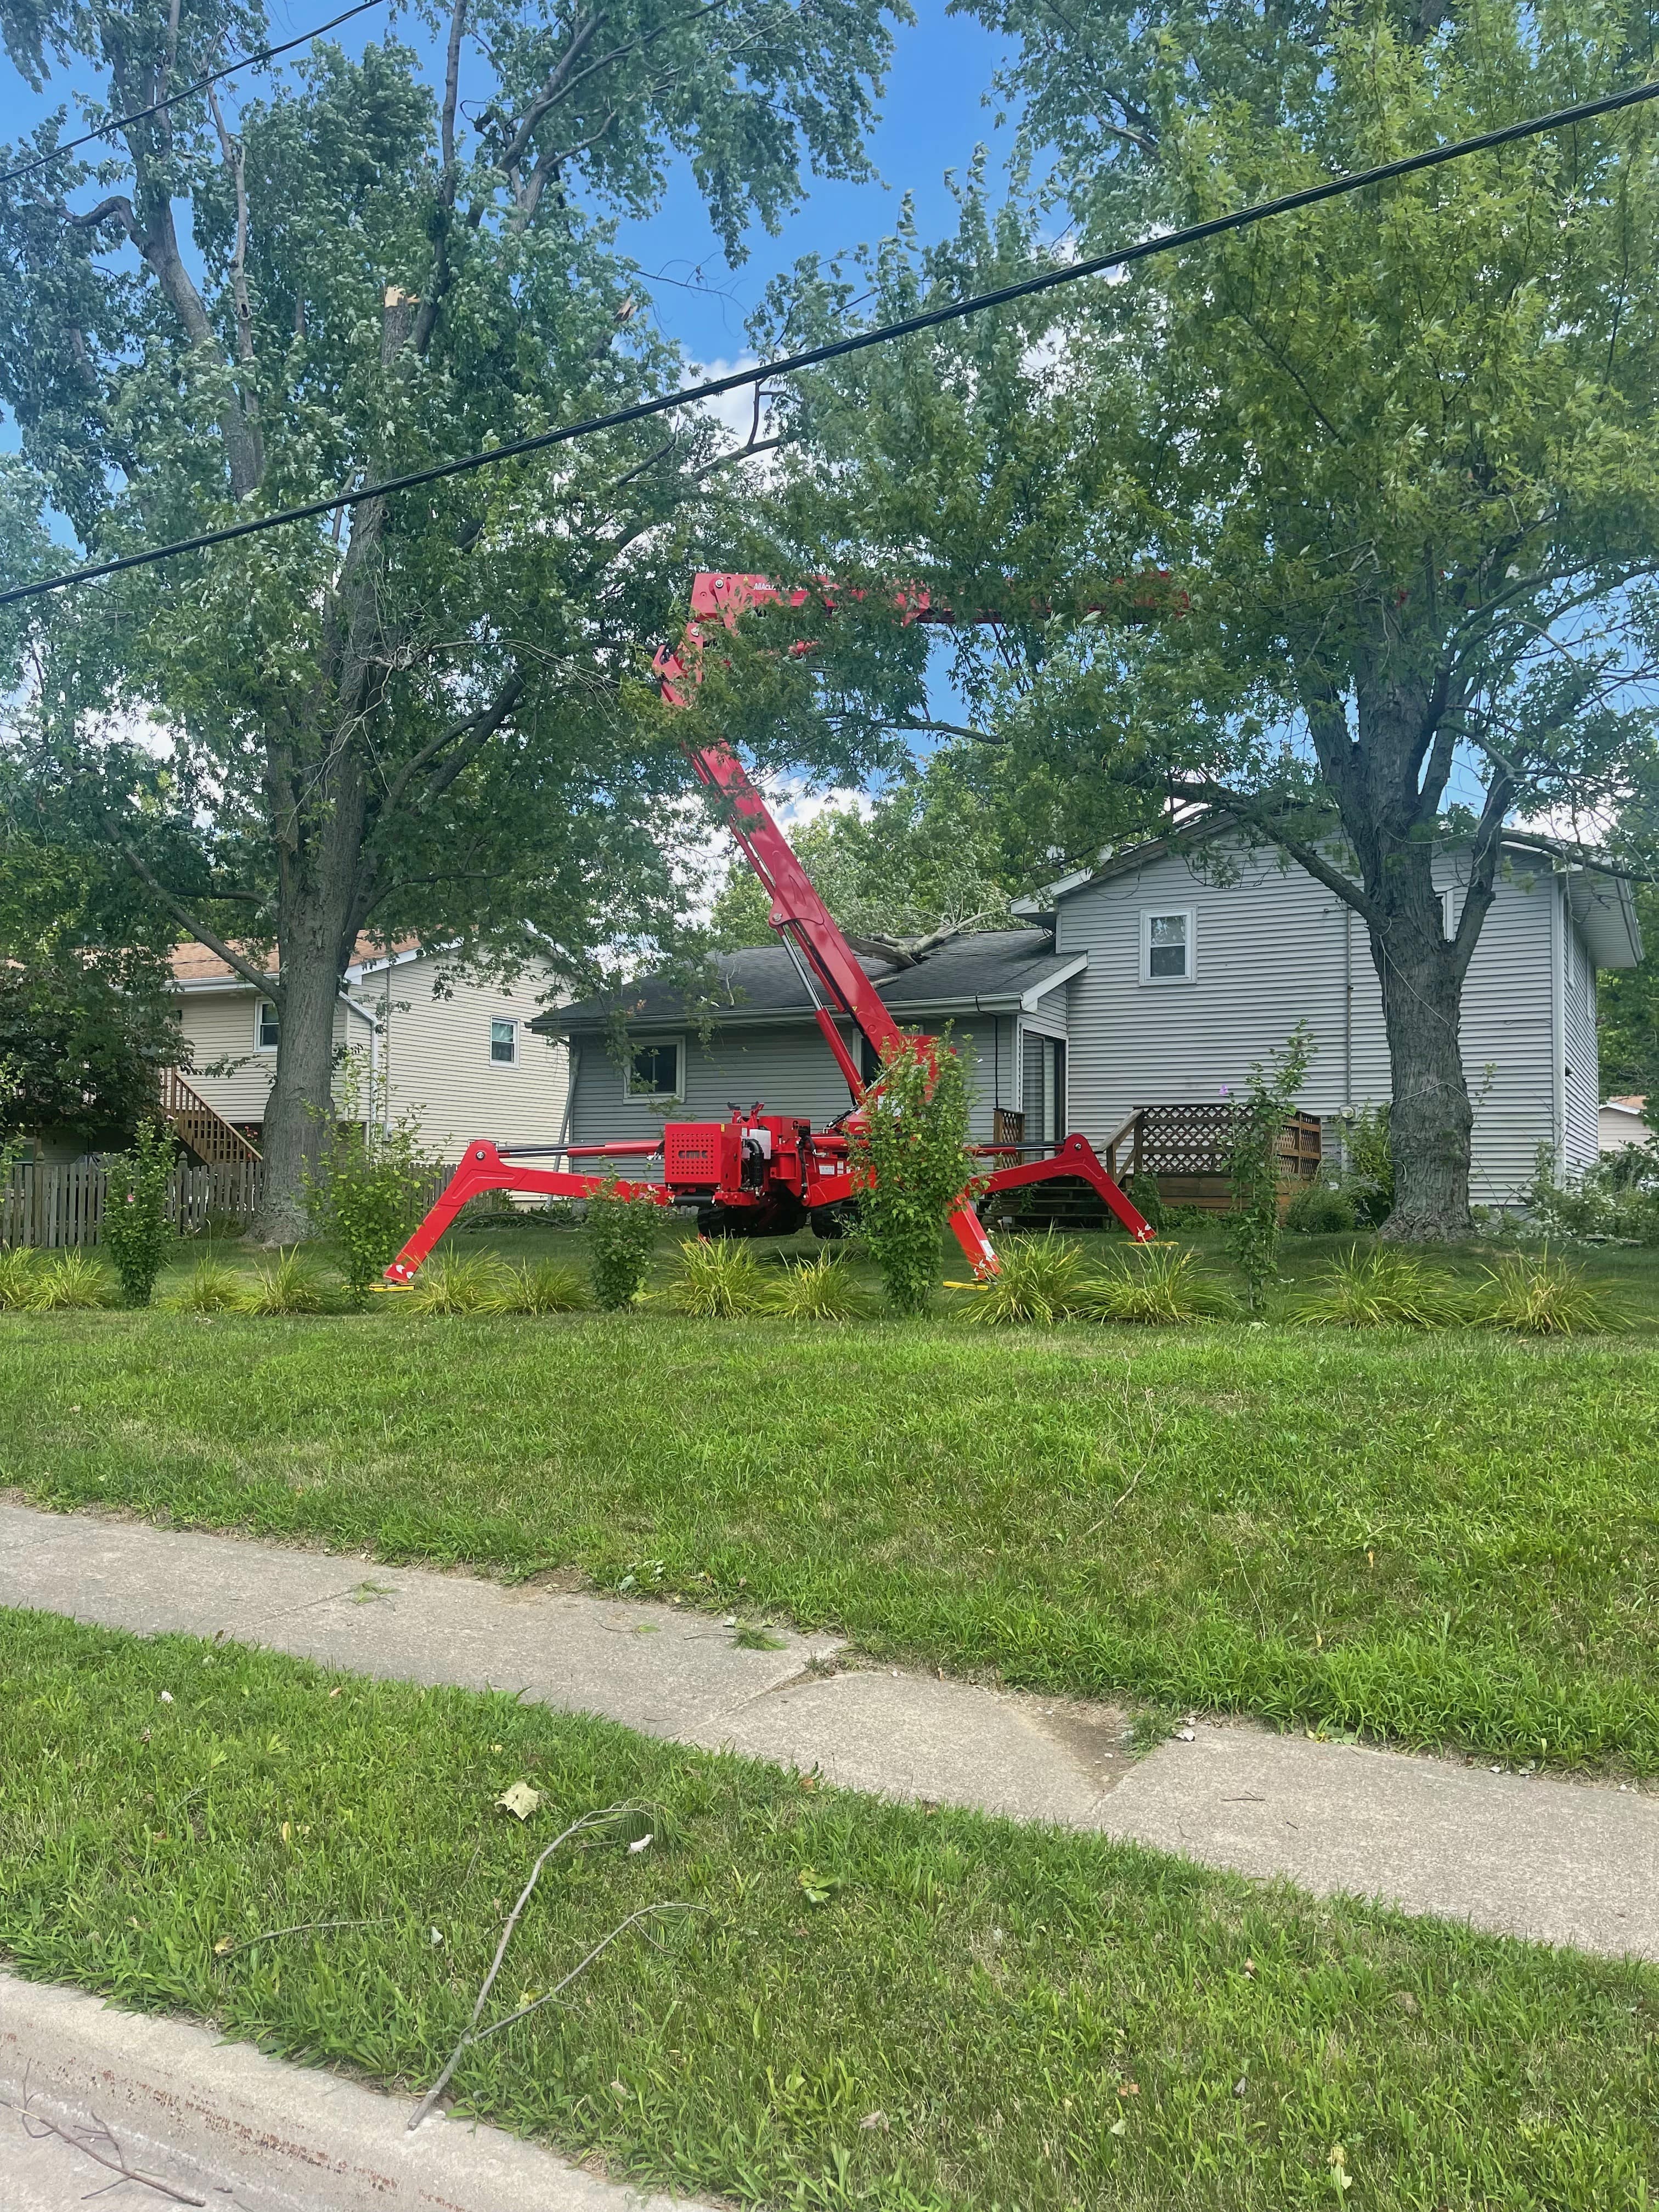 Tree Cutters on Work